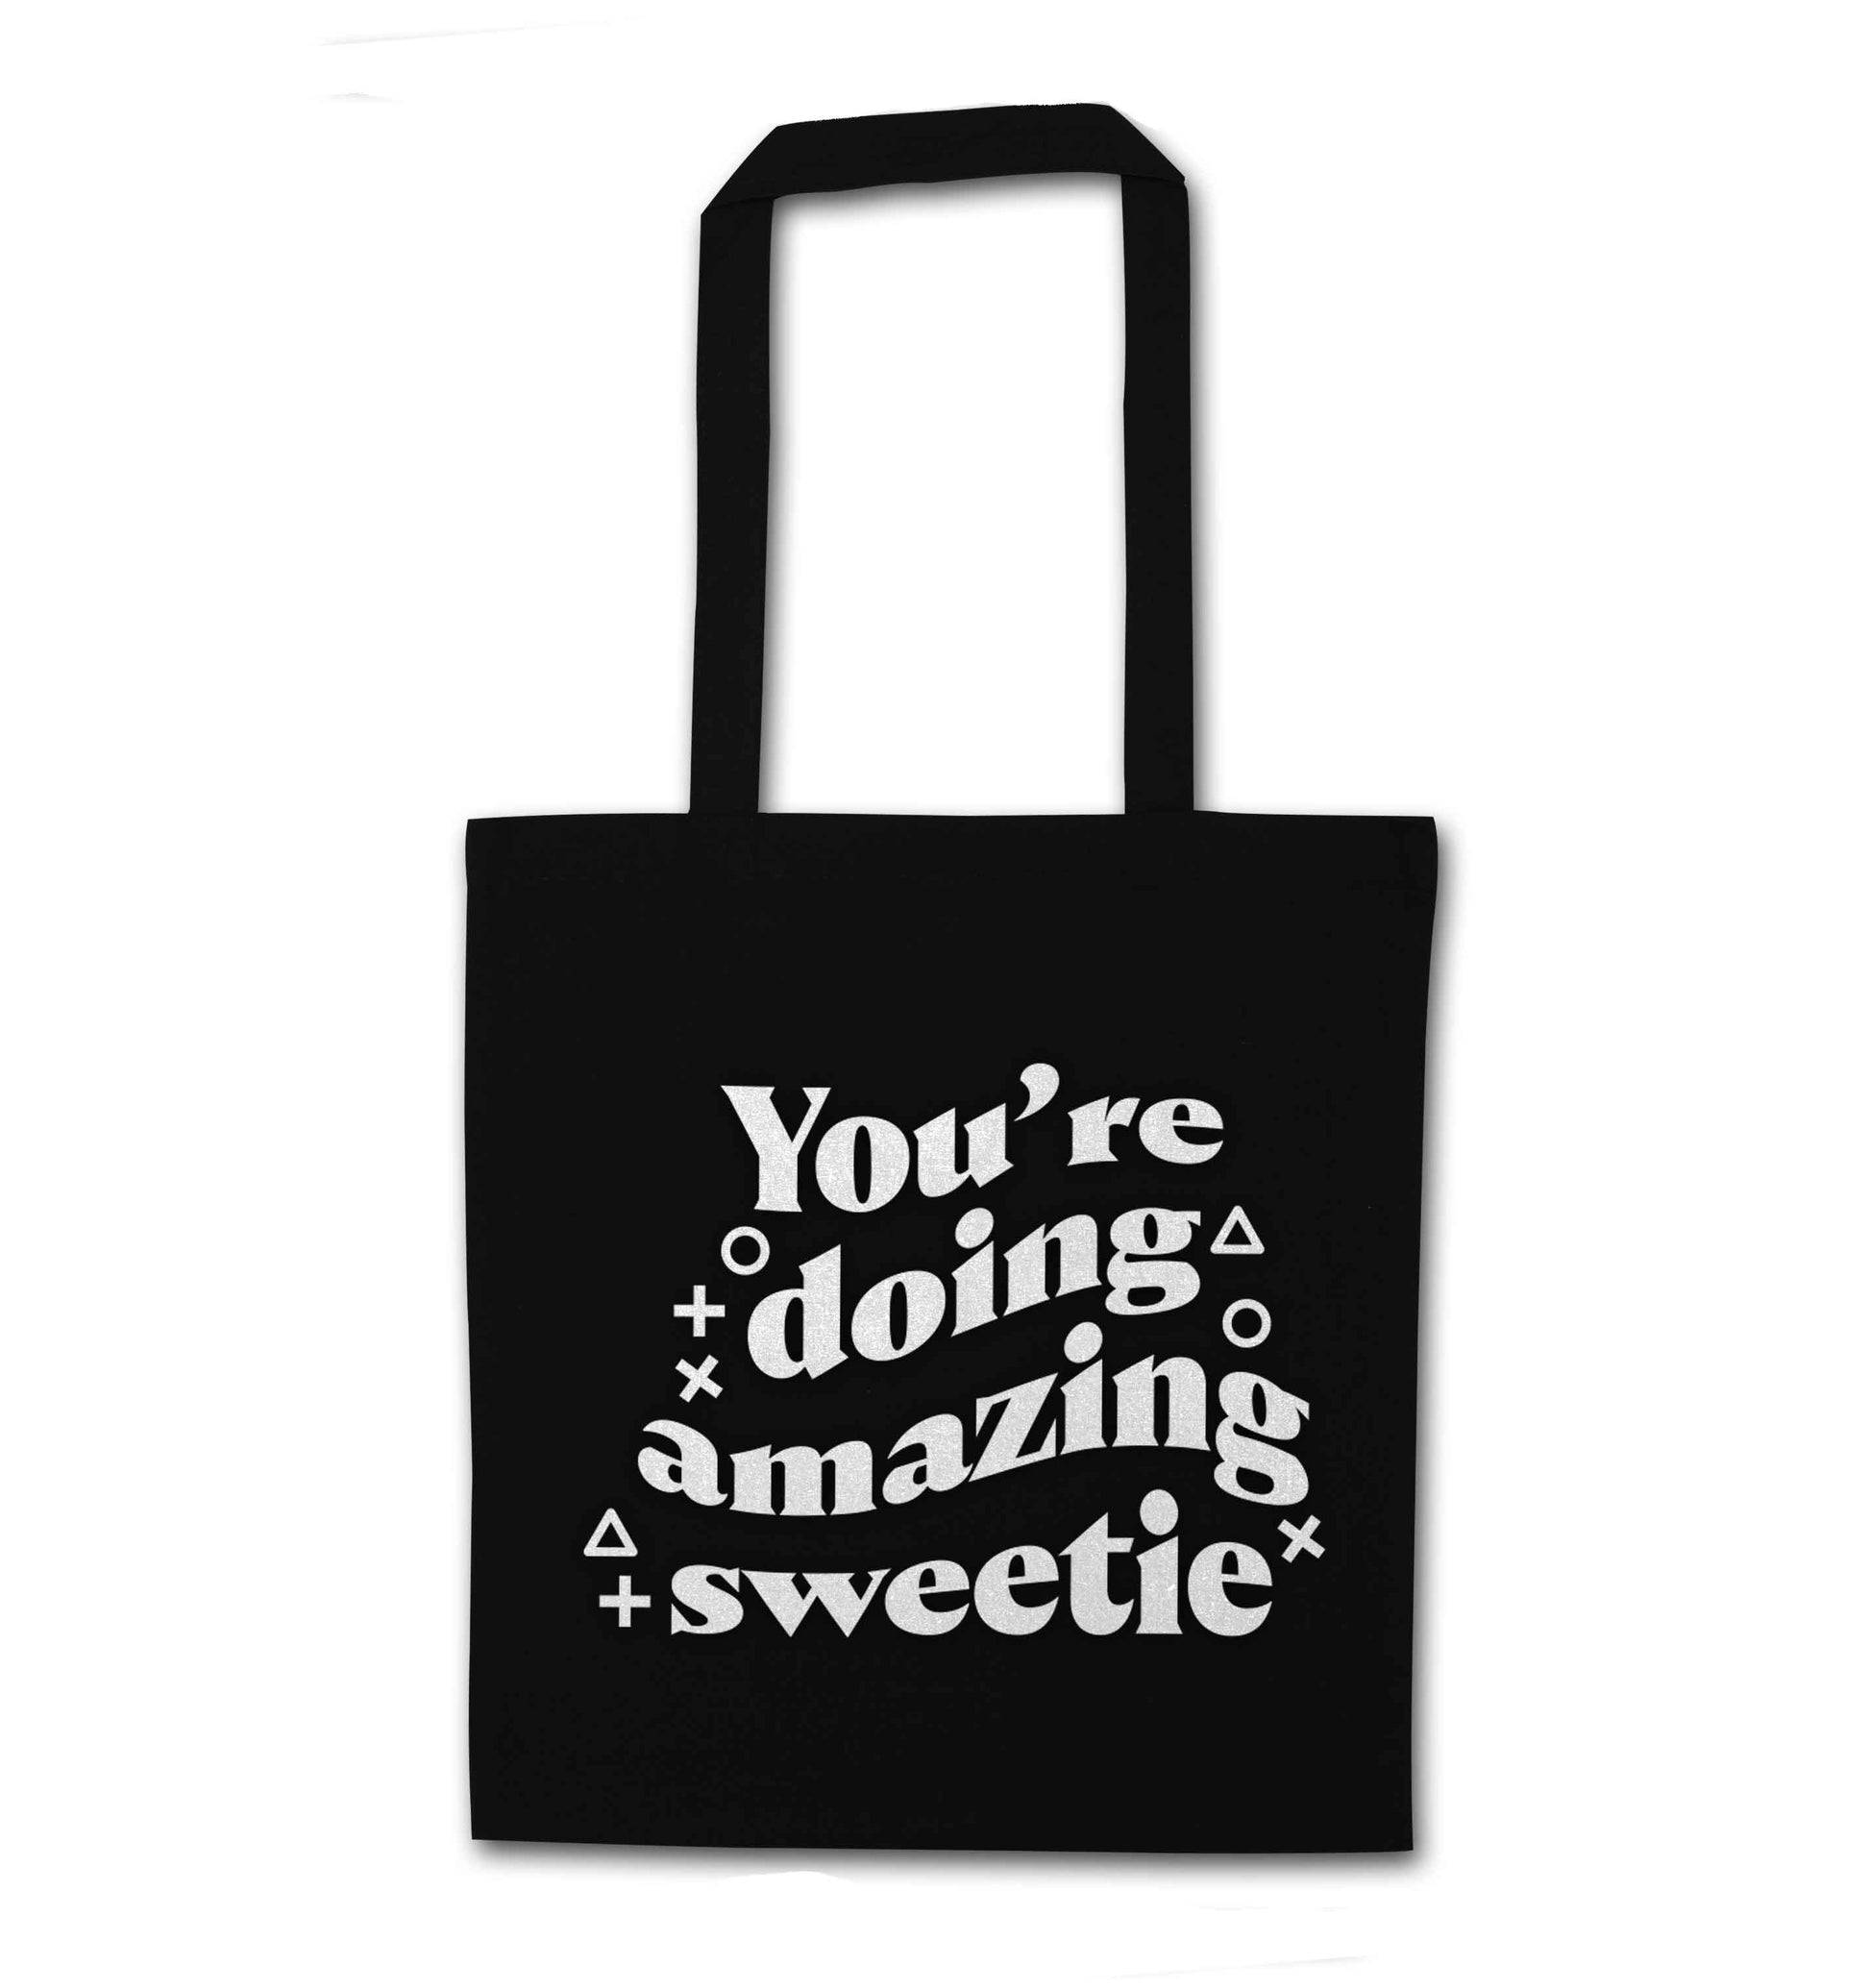 You're doing amazing sweetie black tote bag